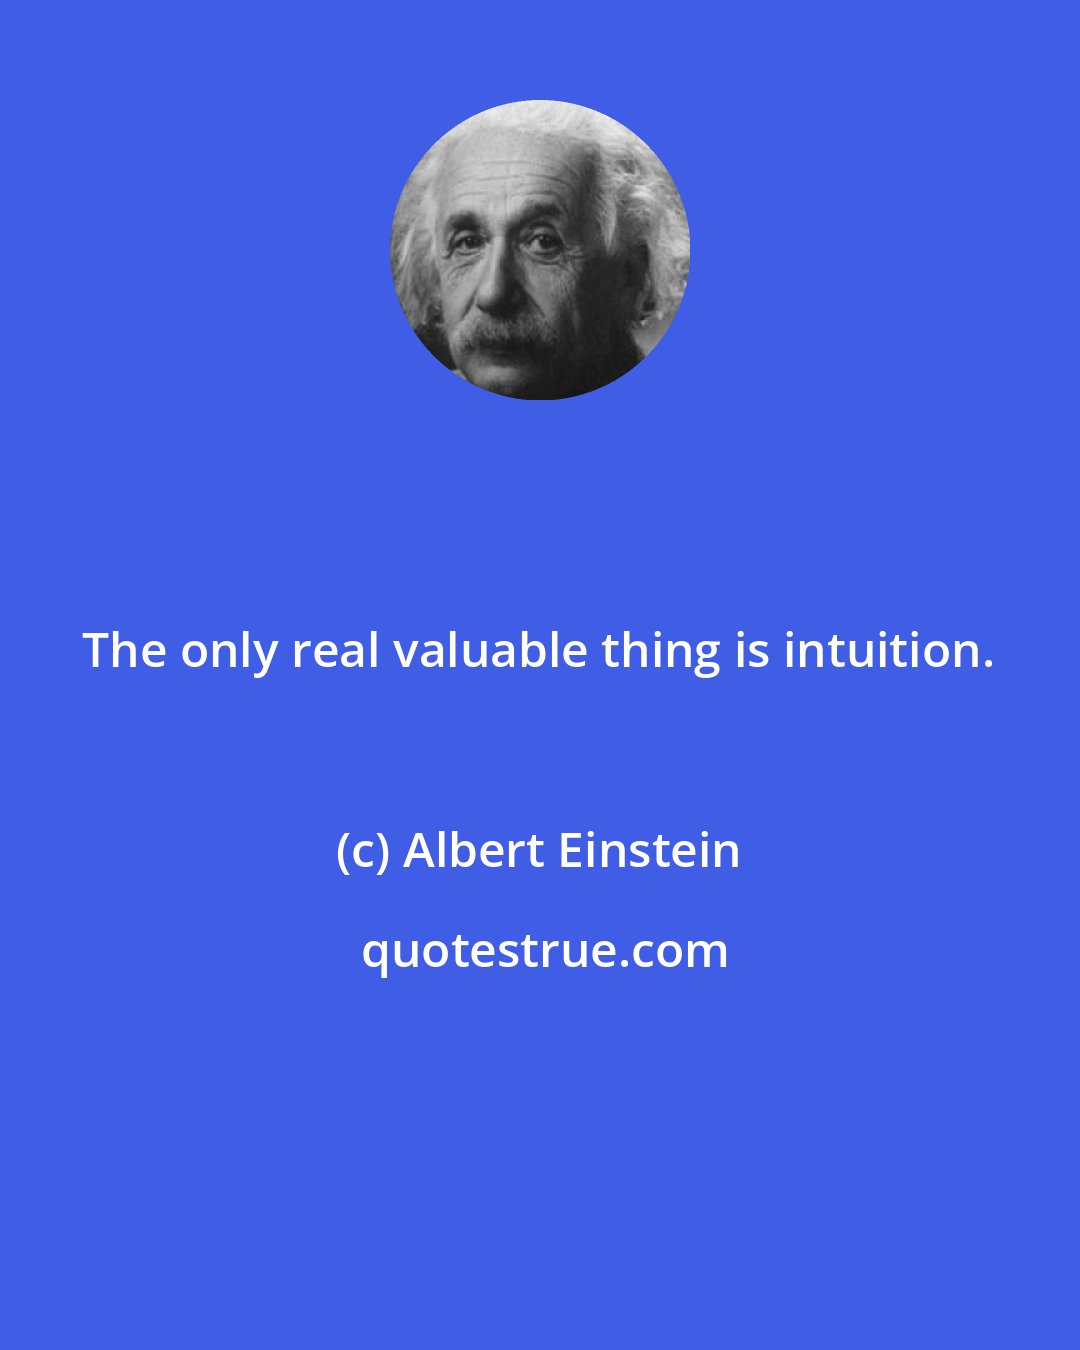 Albert Einstein: The only real valuable thing is intuition.